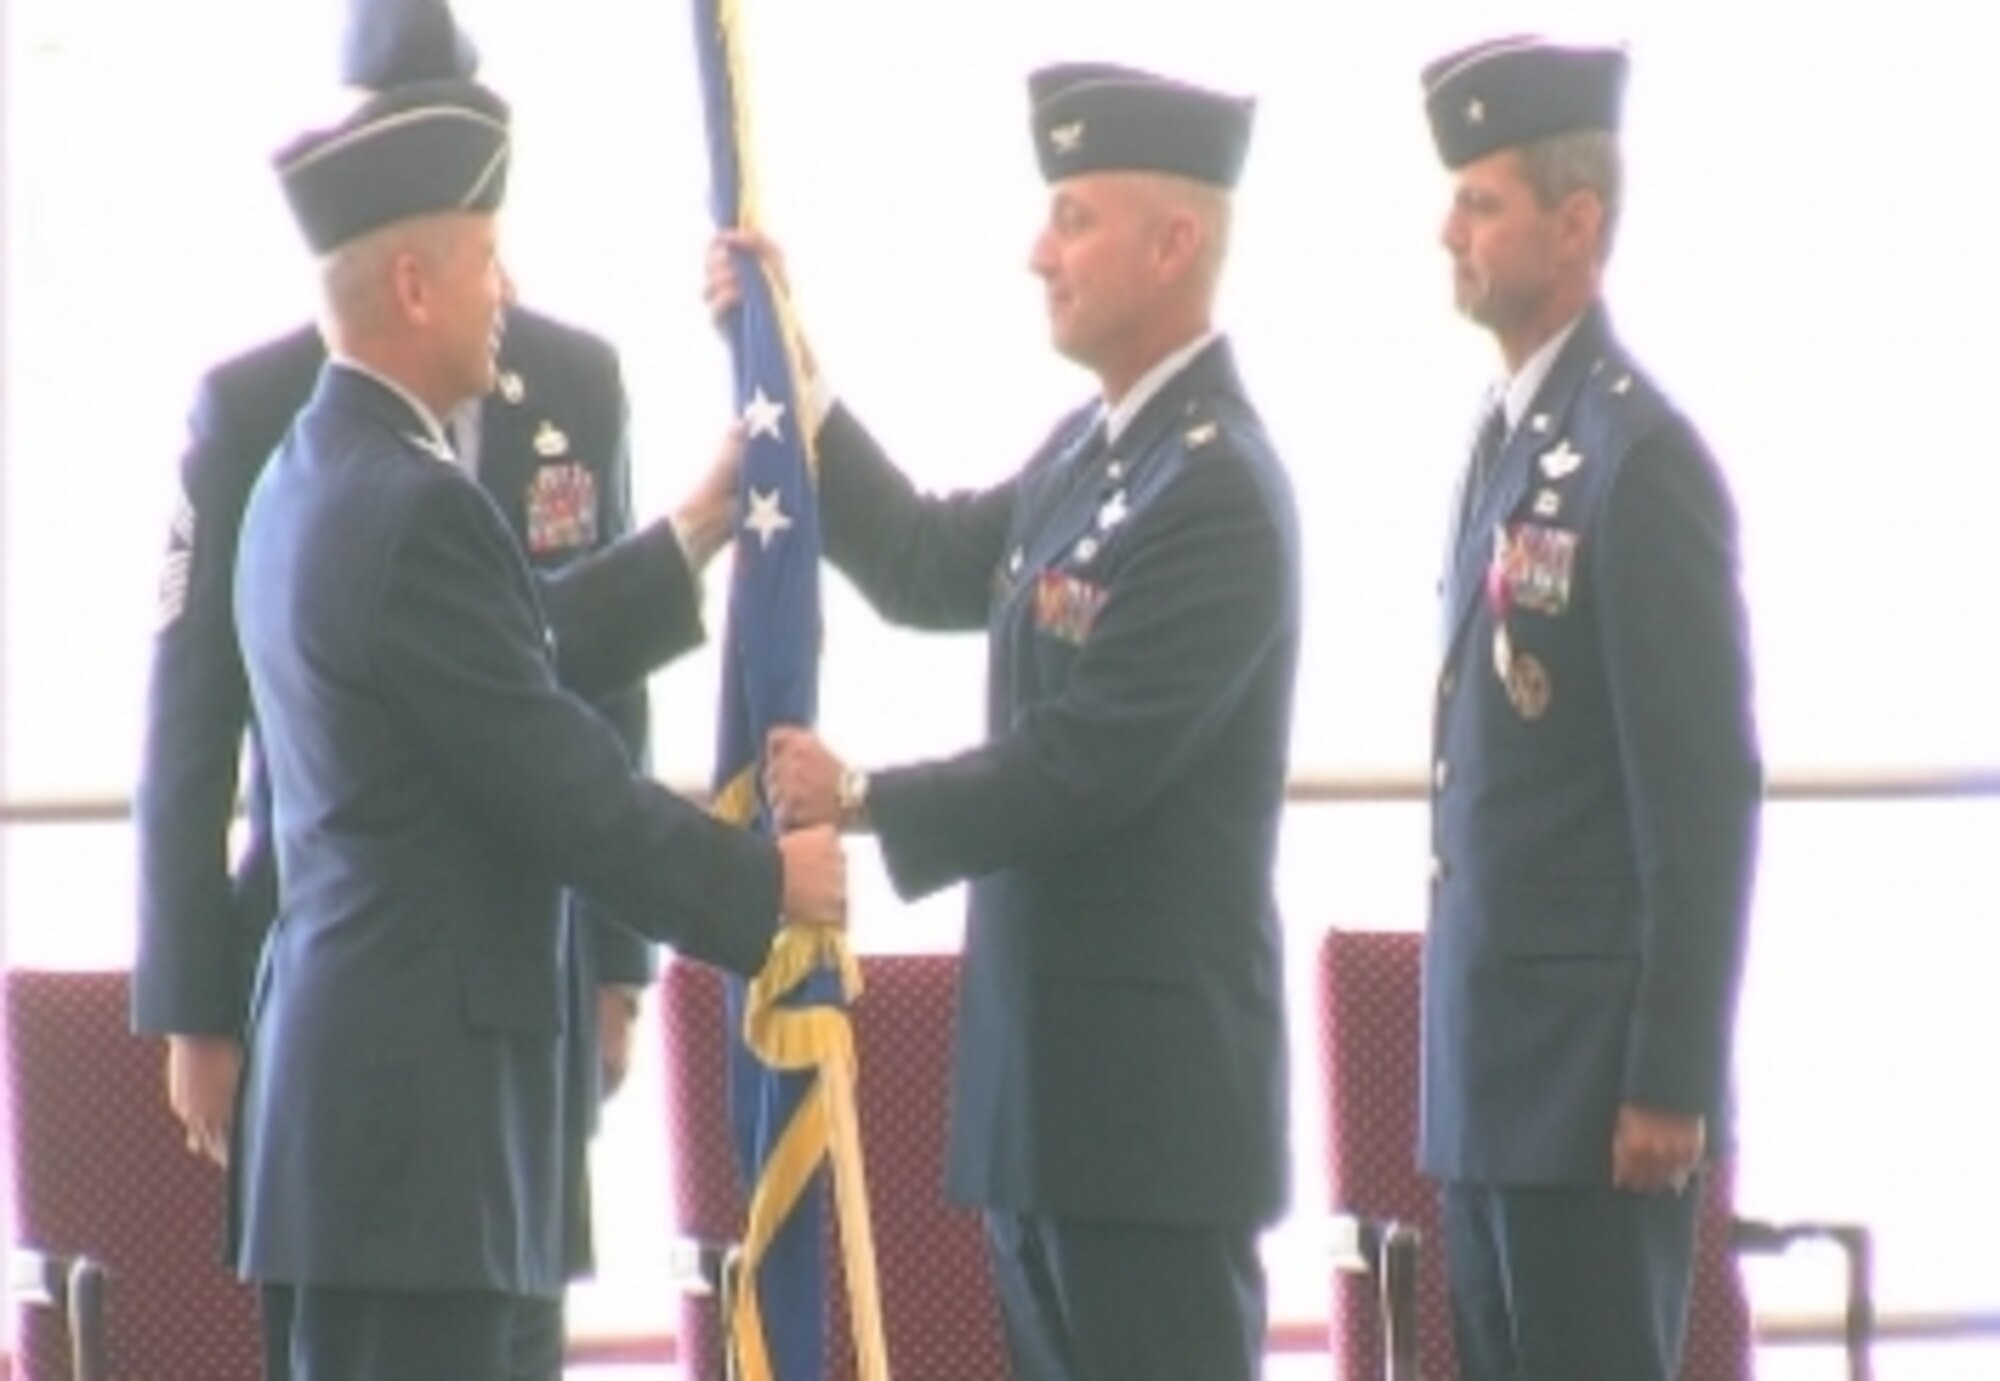 WHITEMAN AIR FORCE BASE, Mo. -- (Left to right) Lt. Gen. Robert Elder Jr., 8th Air Force commander, presents the 509th Bomb Wing guidon to Col. Garrett Harencak as Brig. Gen. Greg Biscone stands at attention during the 509th Bomb Wing change-of-command ceremony Sept. 14. Colonel Harencak took command of the 509th BW from General Biscone during the ceremony. General Biscone travels to MacDill Air Force Base, Fla., to become the deputy commander of Operations at U.S. Central Command. (U.S. Air Force photo/Staff Sgt. Felicia Haecker)   